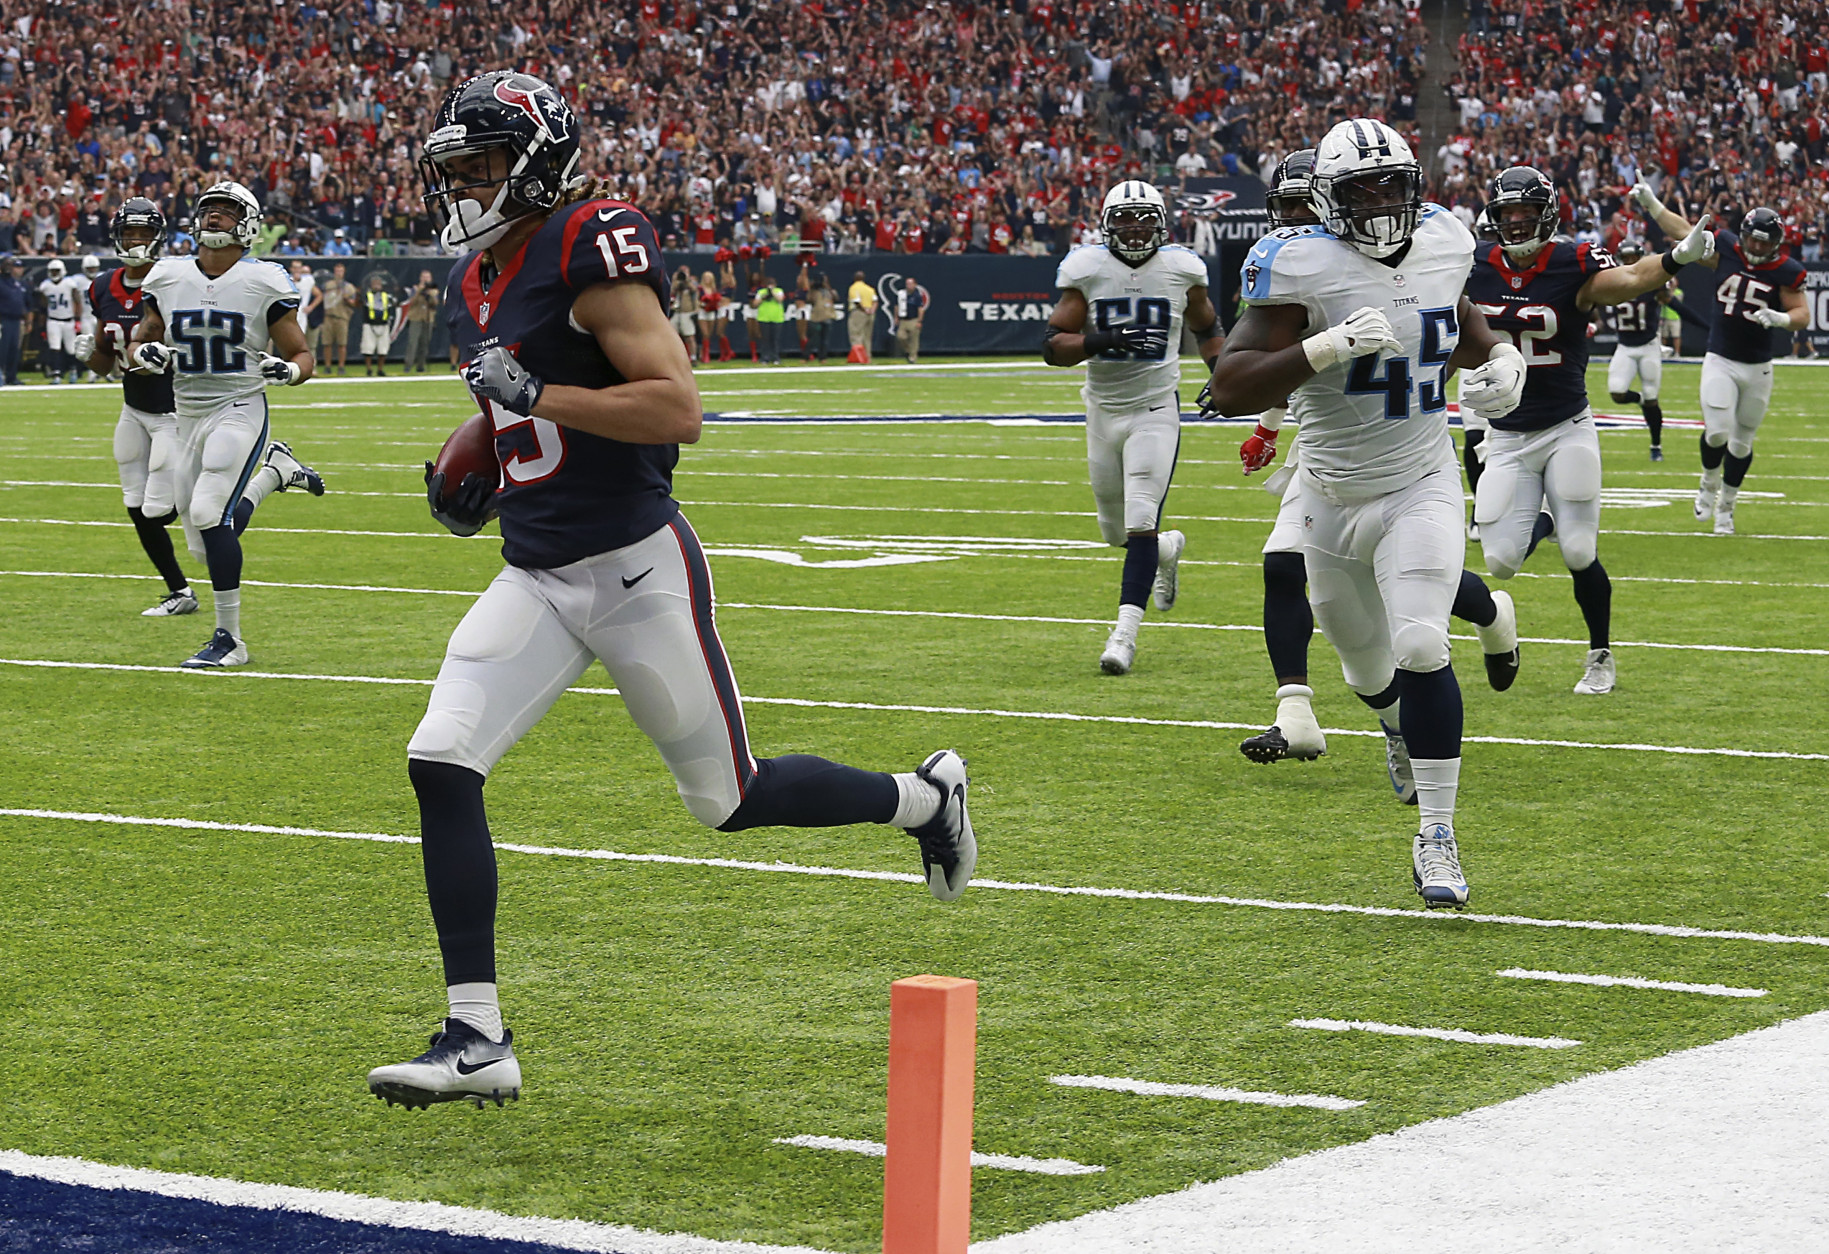 HOUSTON, TX - OCTOBER 2: Will Fuller #15 of the Houston Texans returns a punt for 67 yards and a touchdown as Tennessee Titans defenders pursue in the third quarter during the NFL game between the Tennessee Titans and the Houston Texans at NRG Stadium on October 2, 2016 in Houston, Texas.  (Photo by Bob Levey/Getty Images)